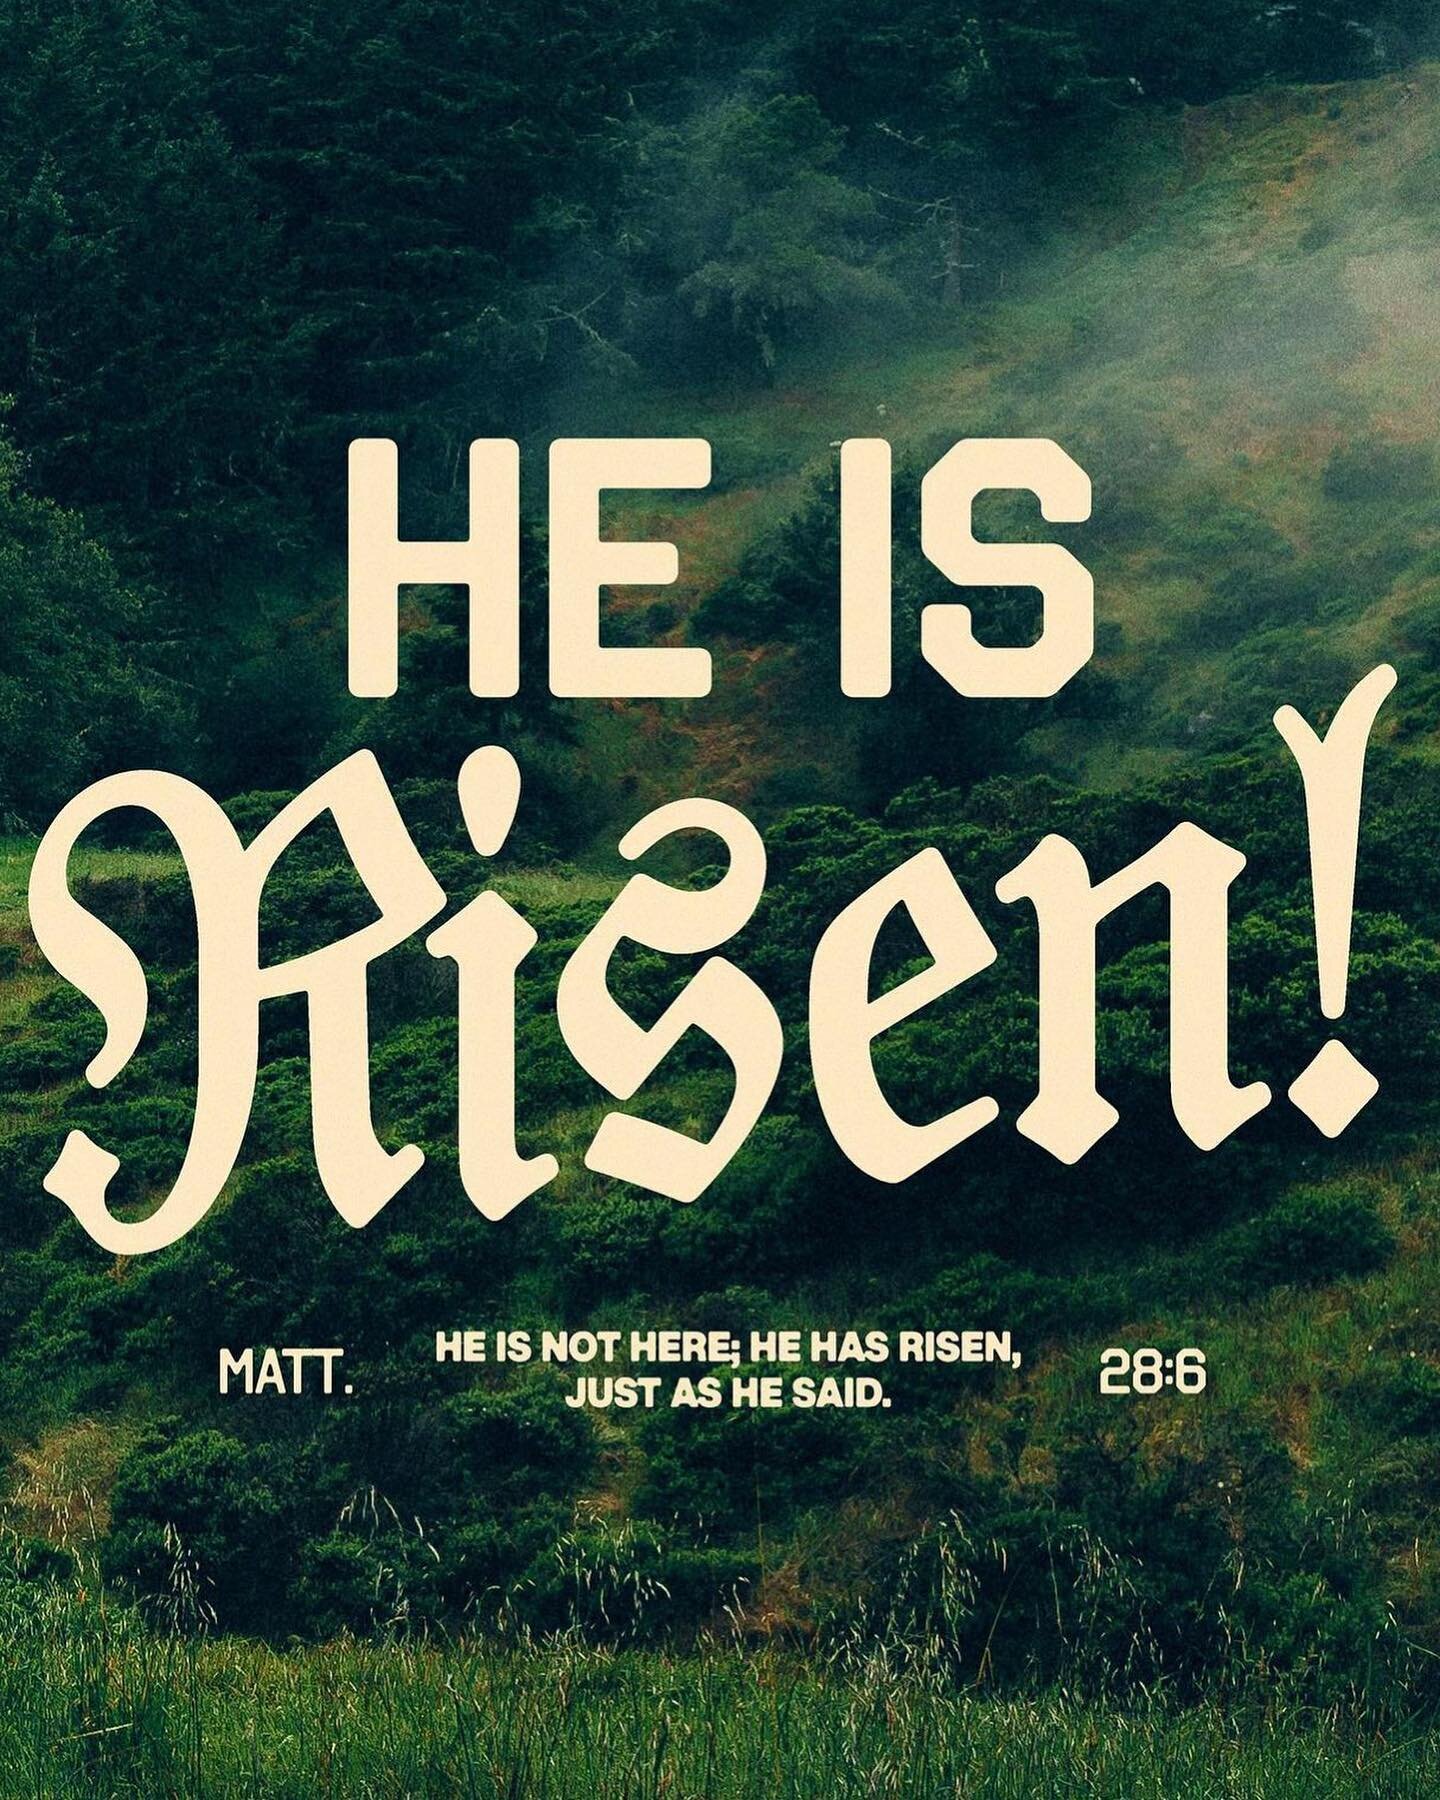 Happy Easter all. I hope you all had a wonderful Sunday. 

God has risen. He is alive. That is the Good News. That is His love. That is His message. Until His return. 

May God keep you and May God bless you✝️